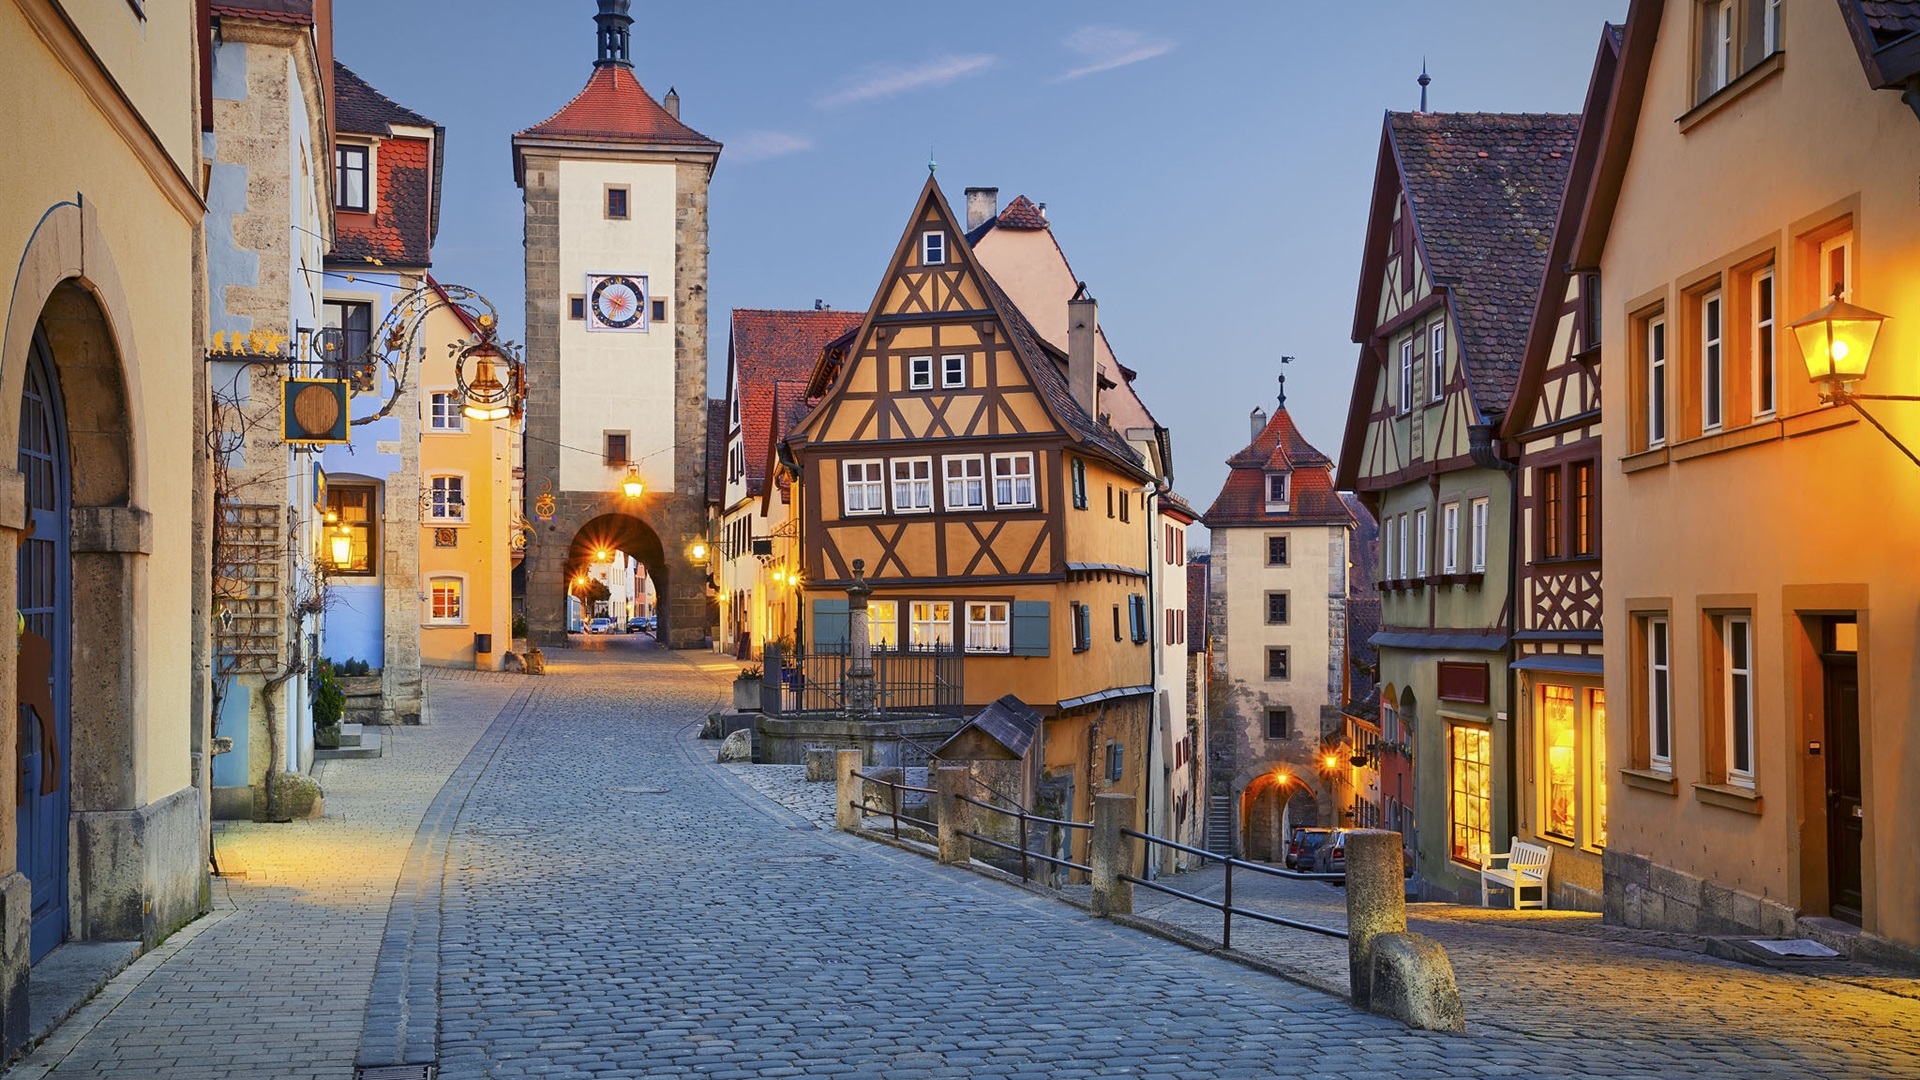 Street House City Building Lights Sky Germany Urban Car Vehicle Fence Bench Rothenburg Evening Clear 1920x1080